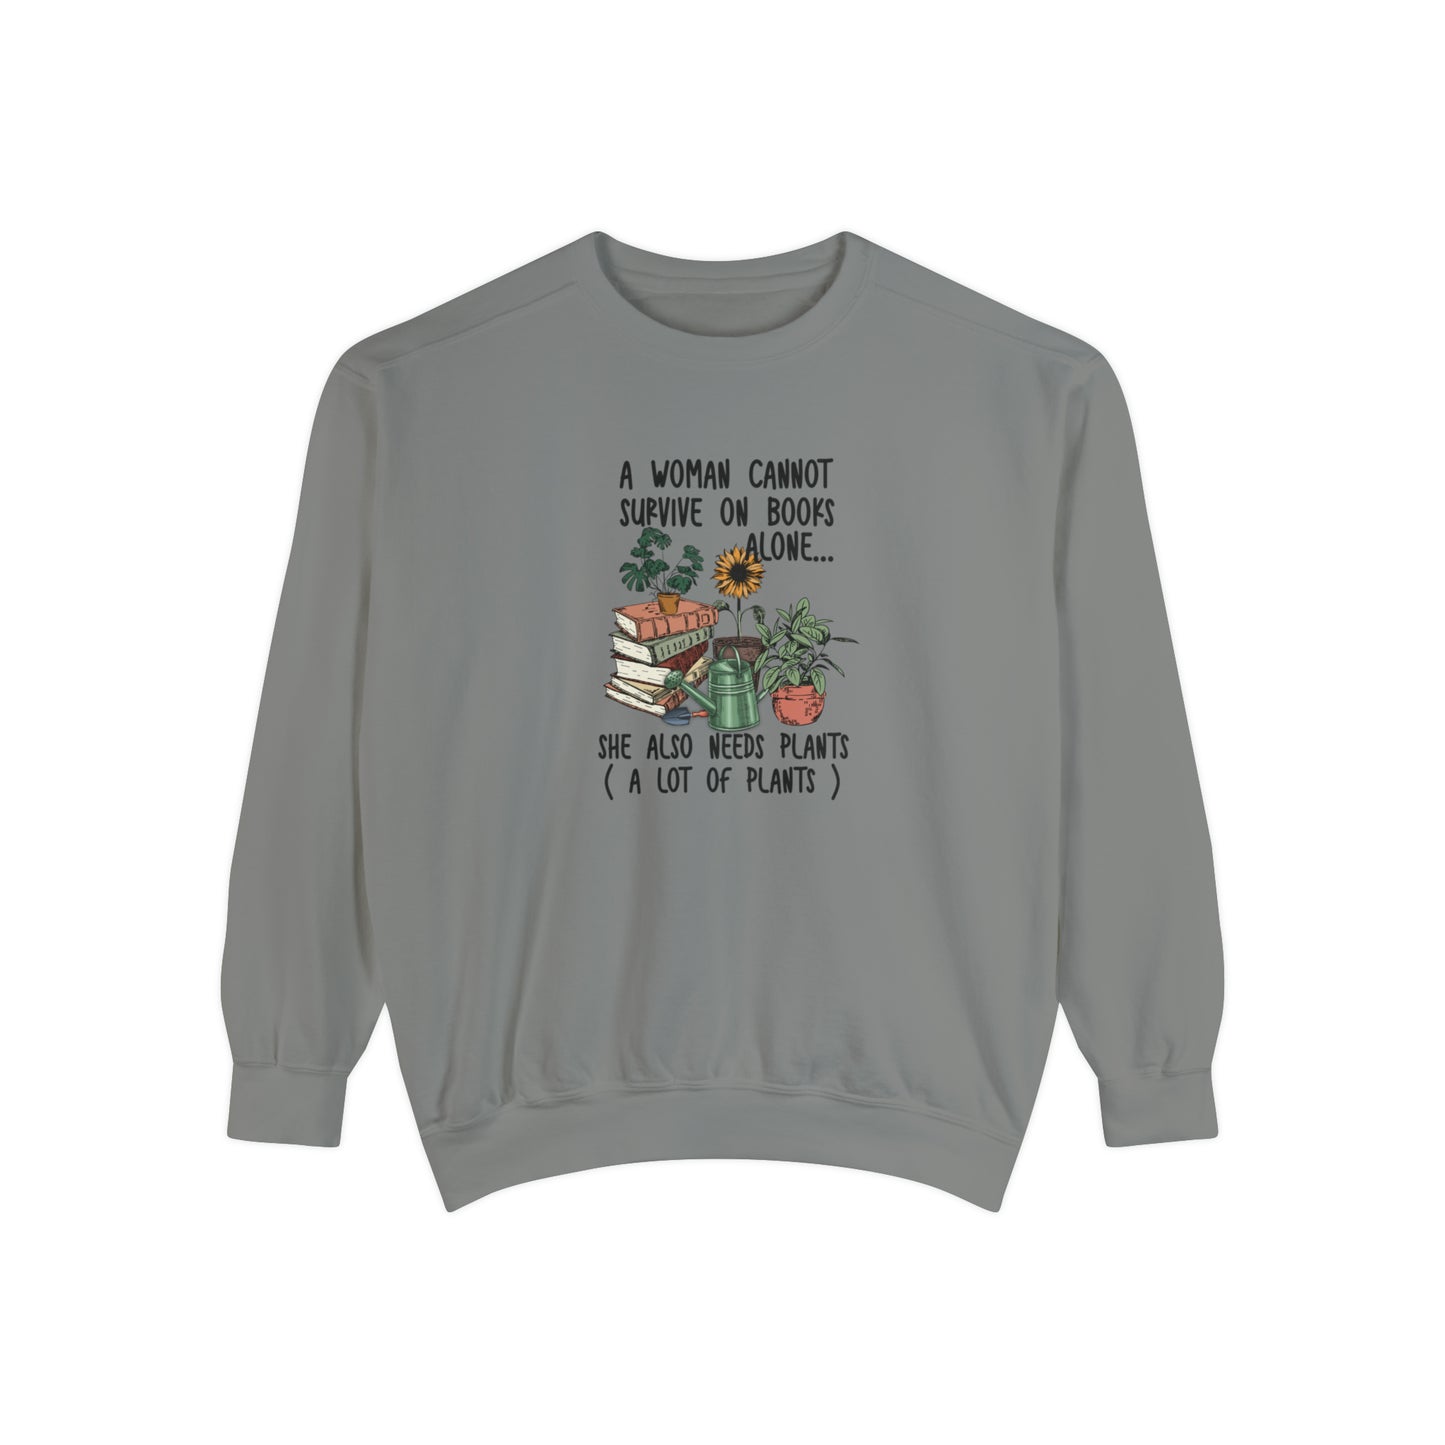 Books and plants Sweatshirt. Comfort colors sweatshirt for book lover and plant lady.